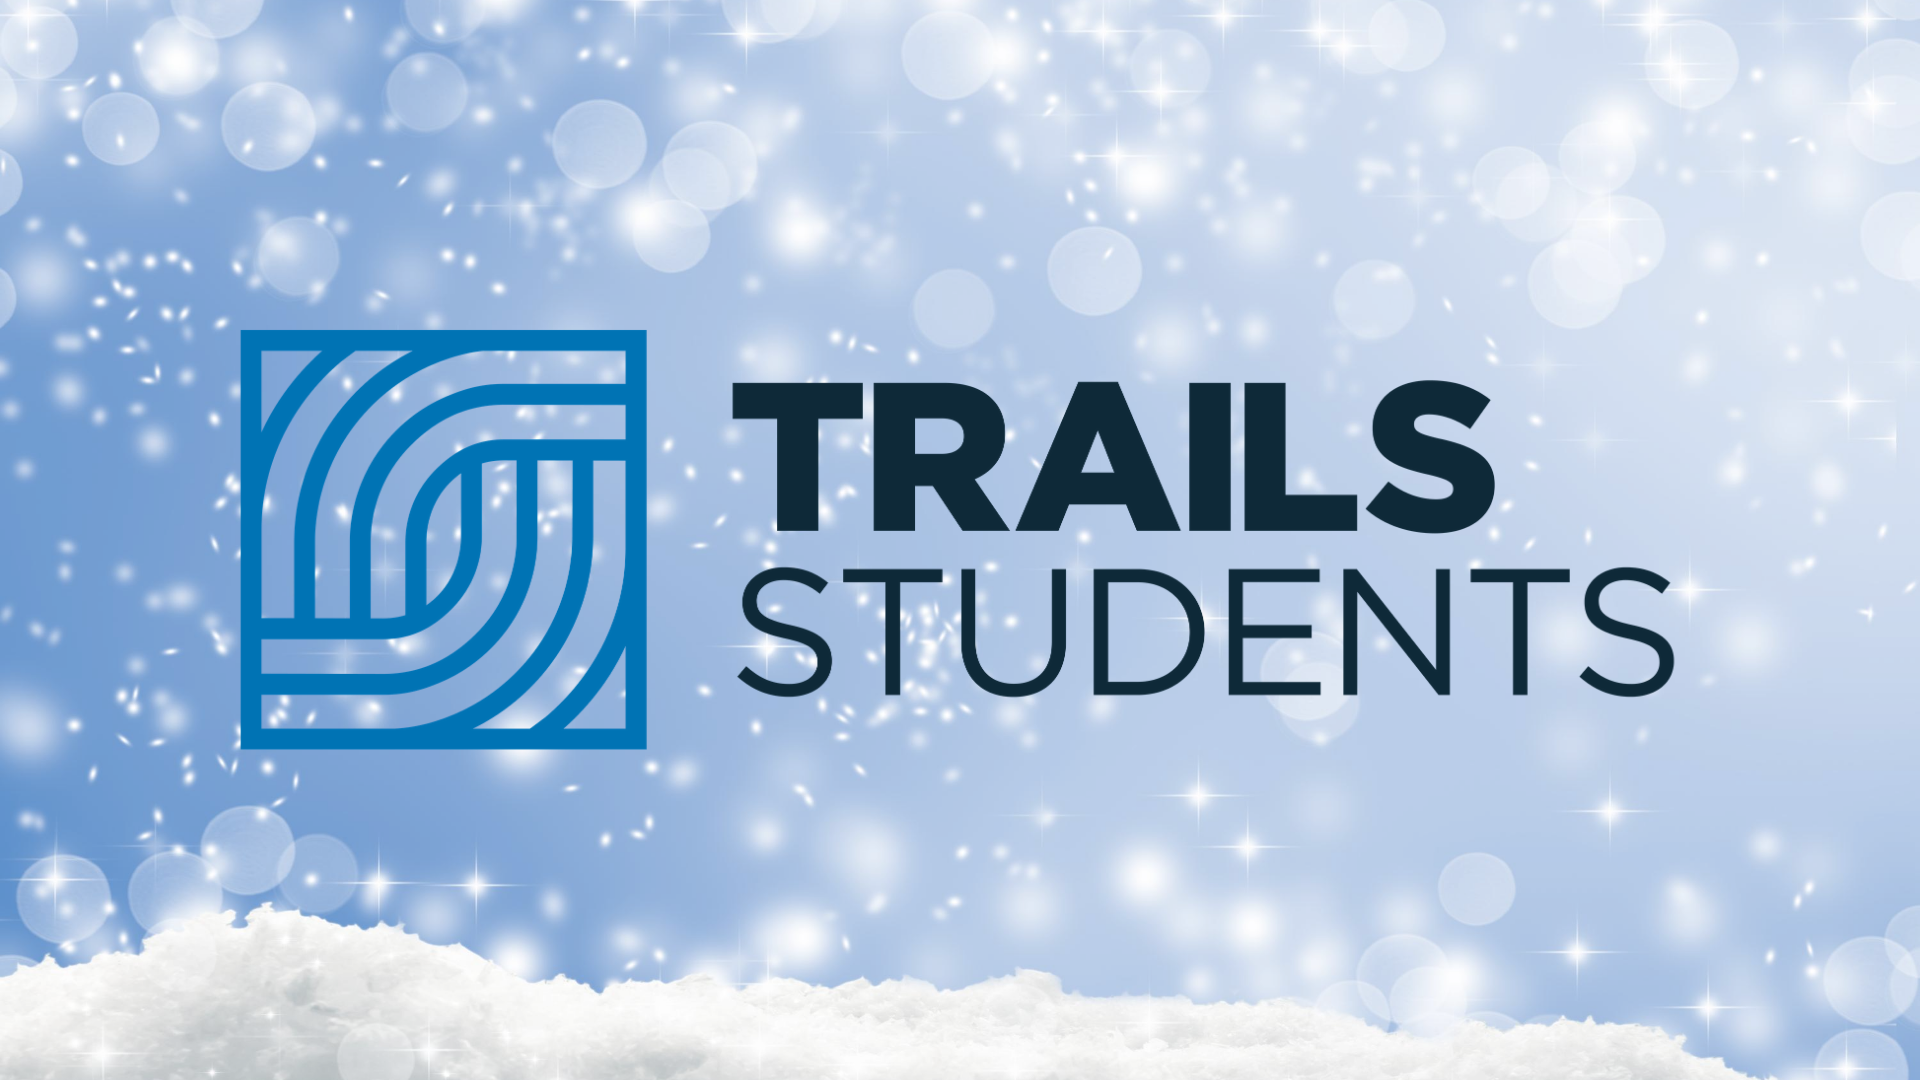 Trails Students Winter 2020 image